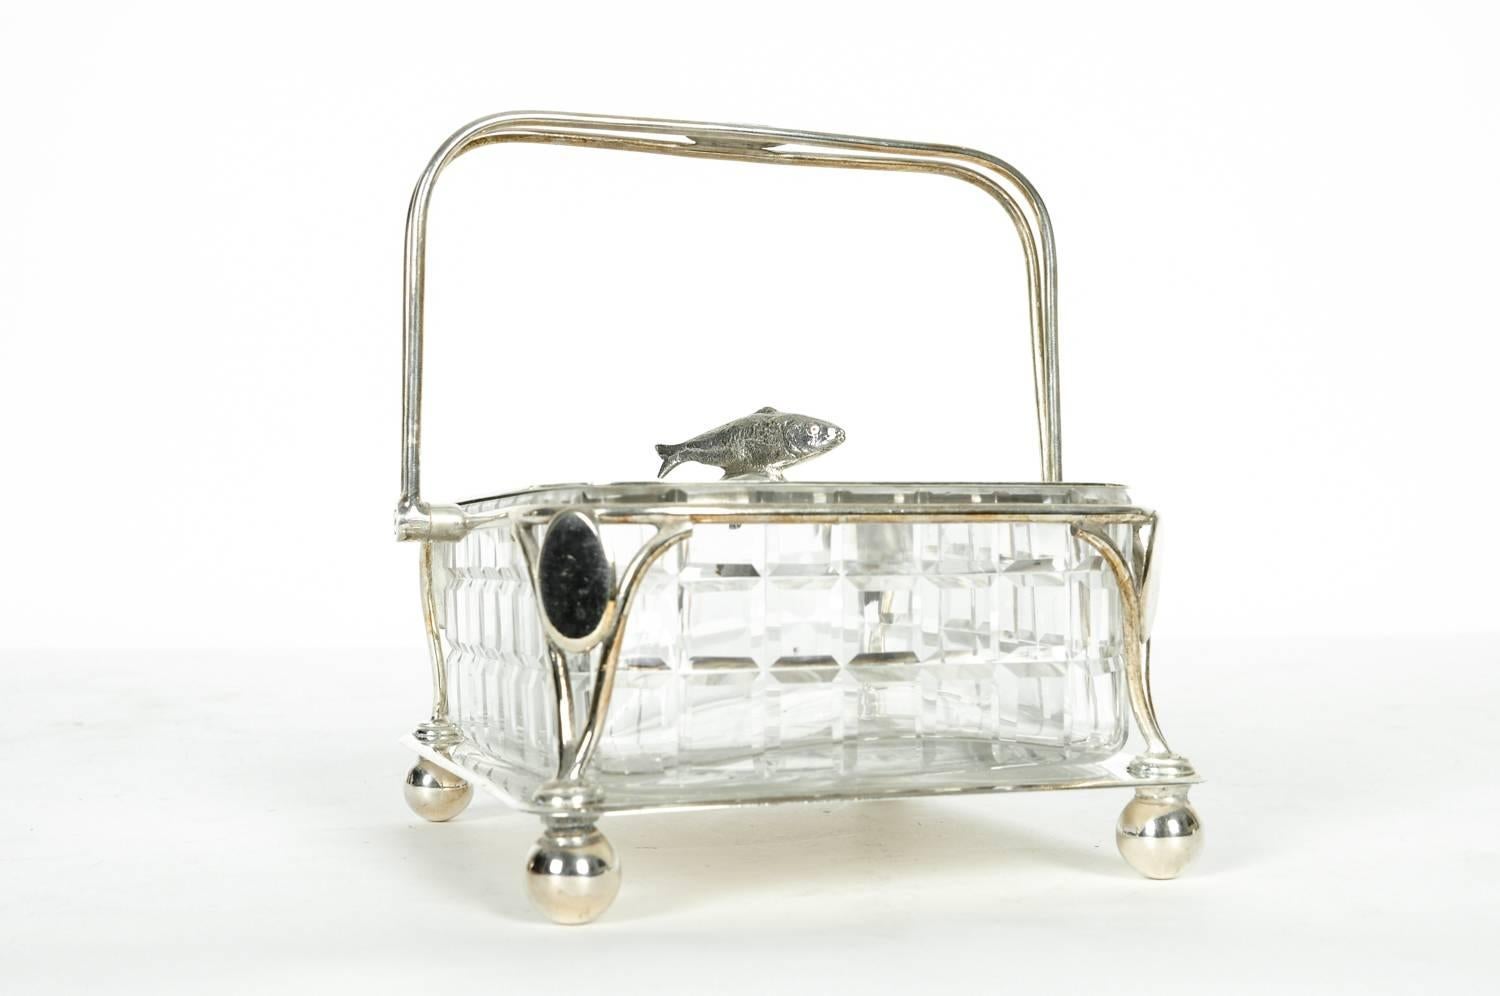 Old English silver plated holding carrier with cut crystal caviar dish. All in excellent condition. The caviar holding carrier measure 6 inches X 6 inches X 6 inches. The cut crystal caviar dish measure 5.3 inches X 4.5 inches.